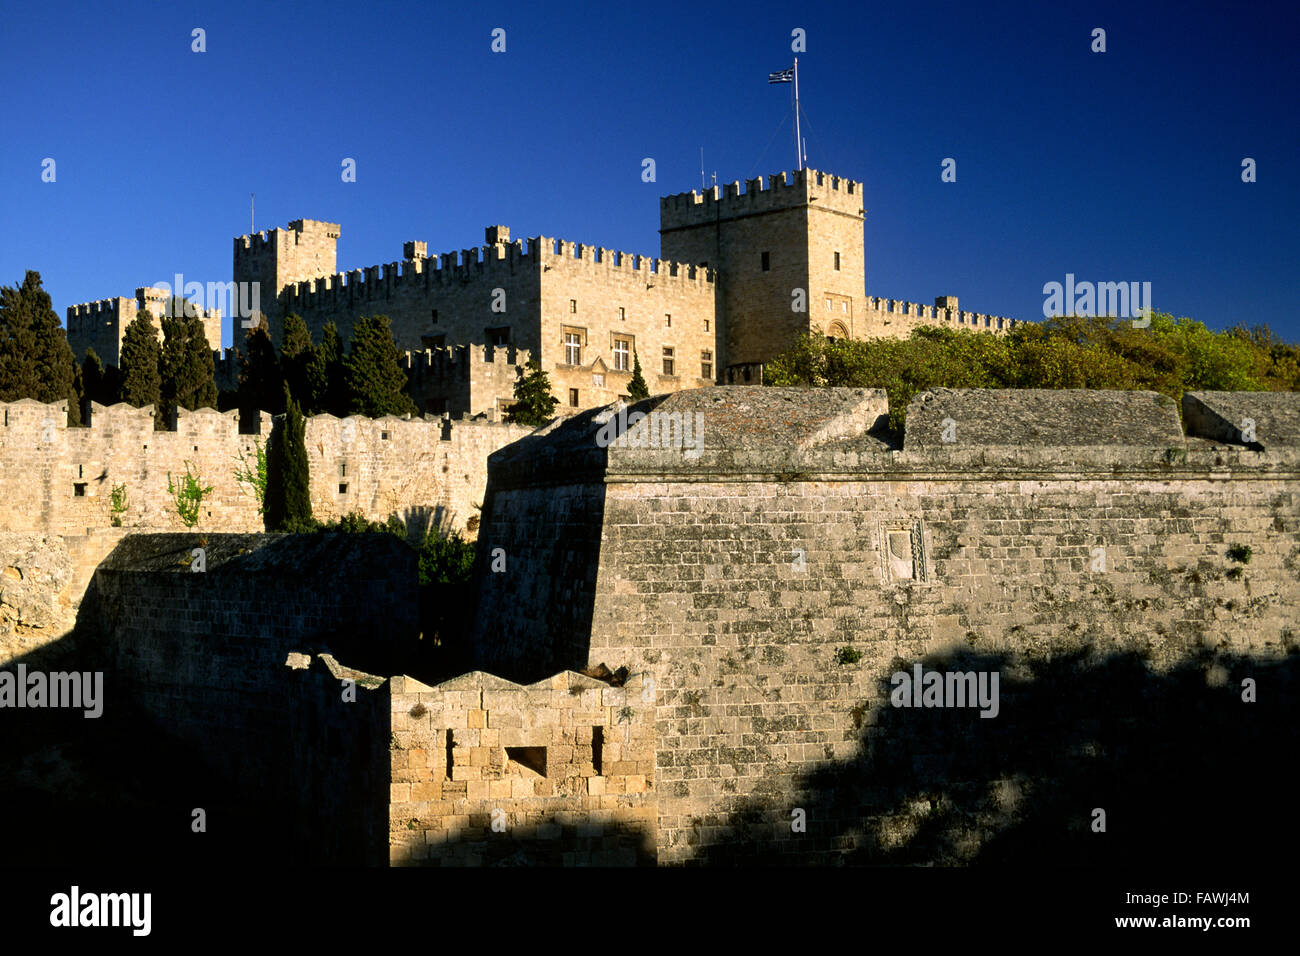 Greece, Dodecanese Islands, Rhodes, old town walls and Palace of the Grand Master of the Knights of Rhodes Stock Photo